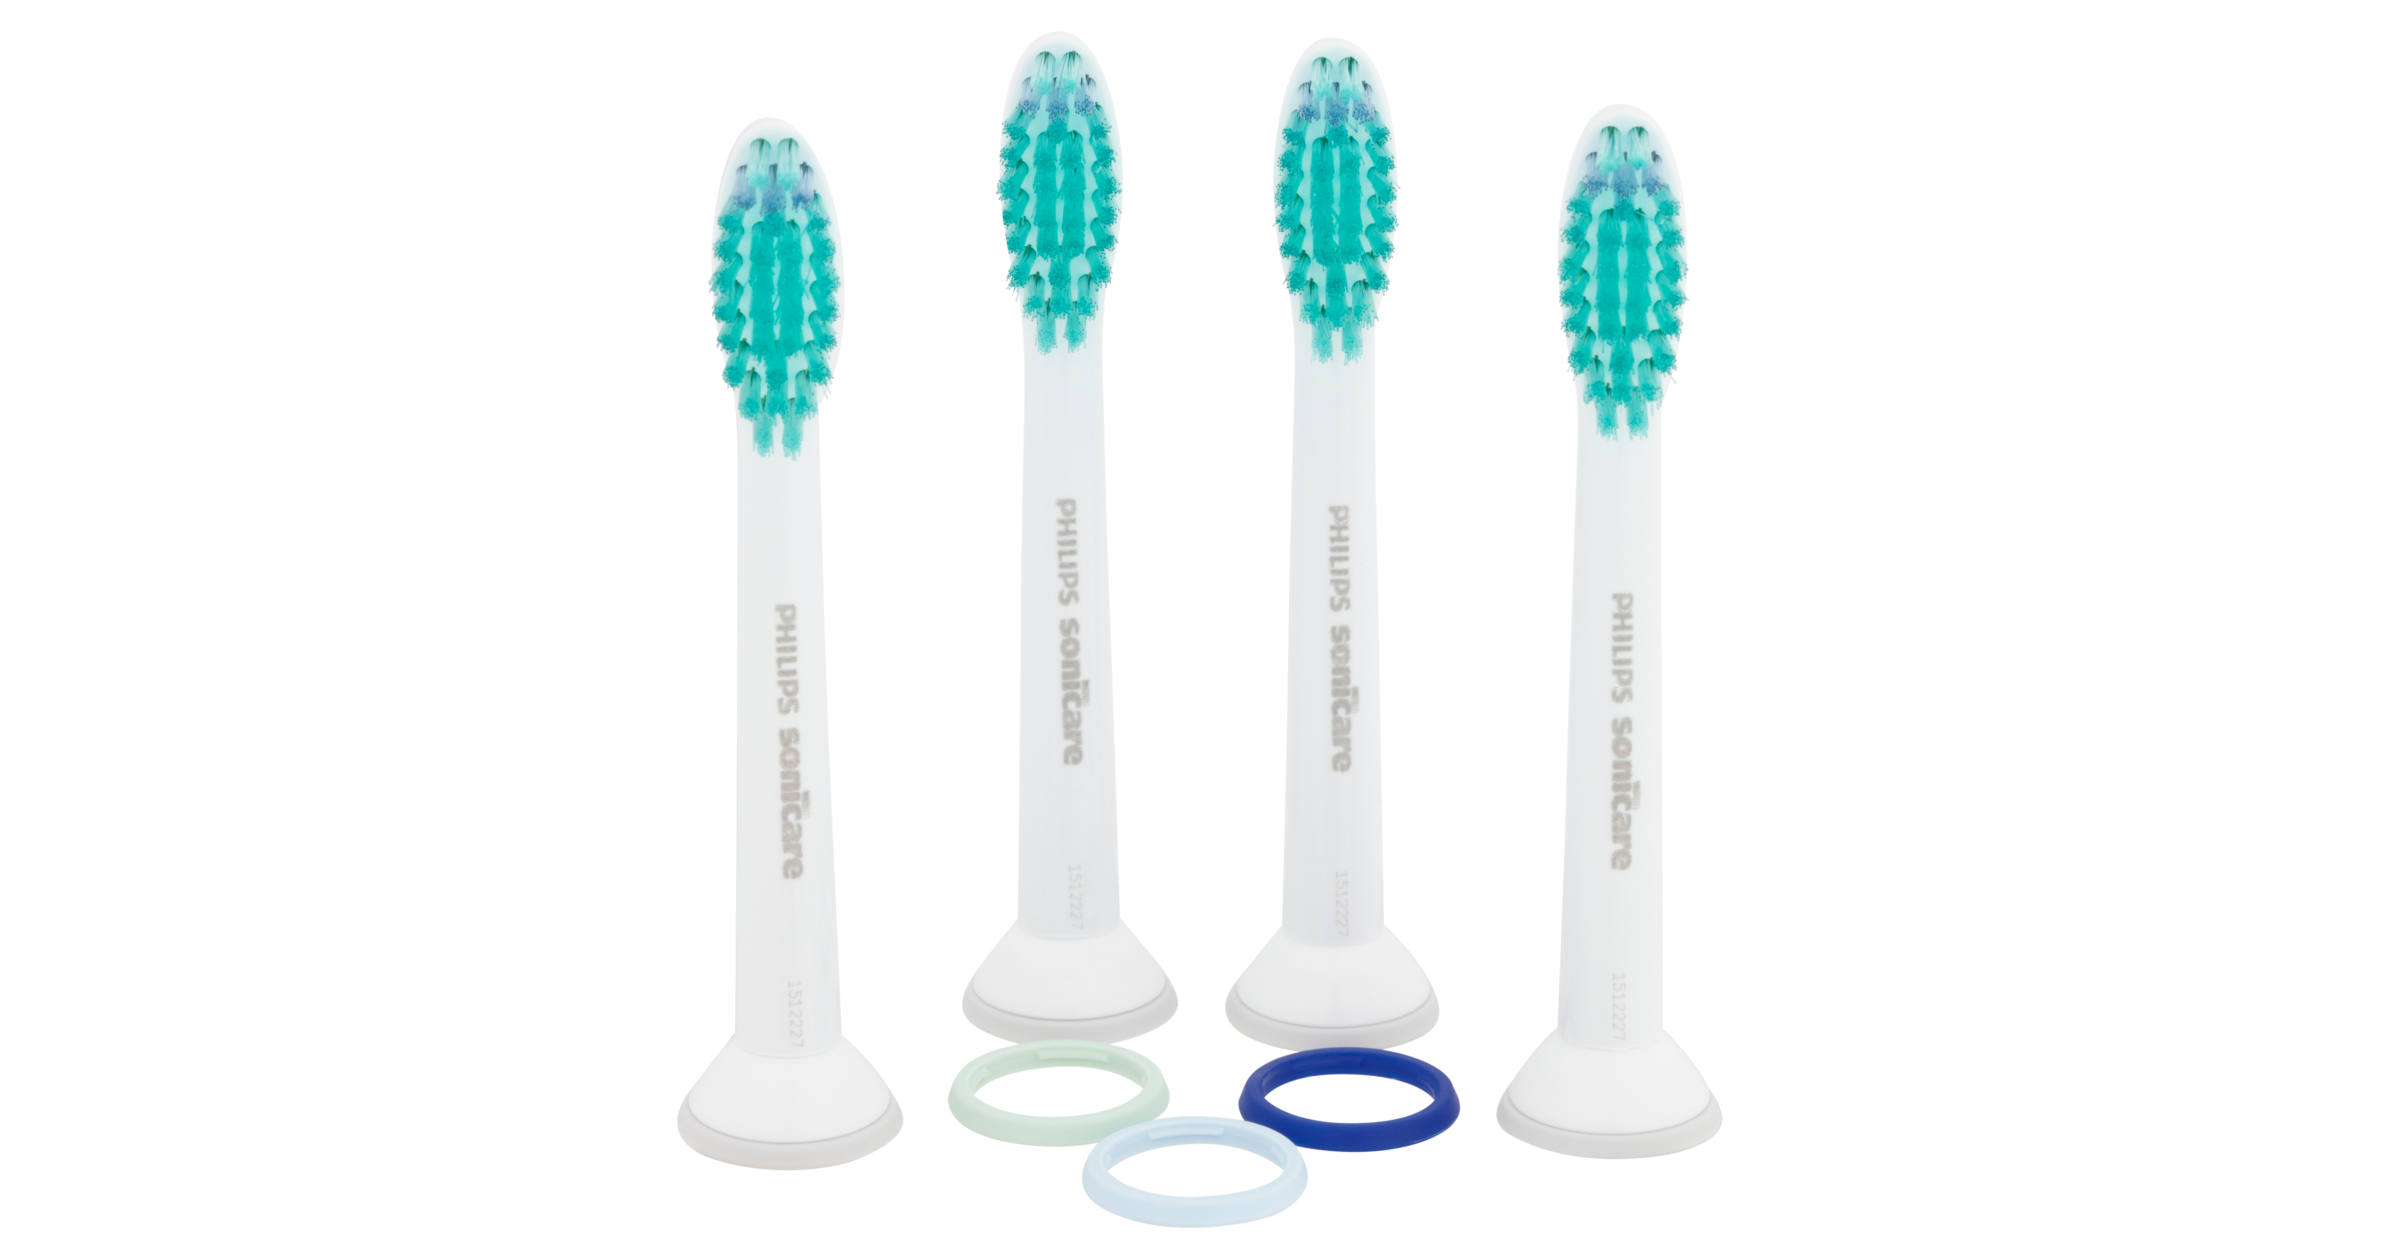 stout honing Insecten tellen Philips Sonicare ProResults 4 Replacement Brush Head Standard